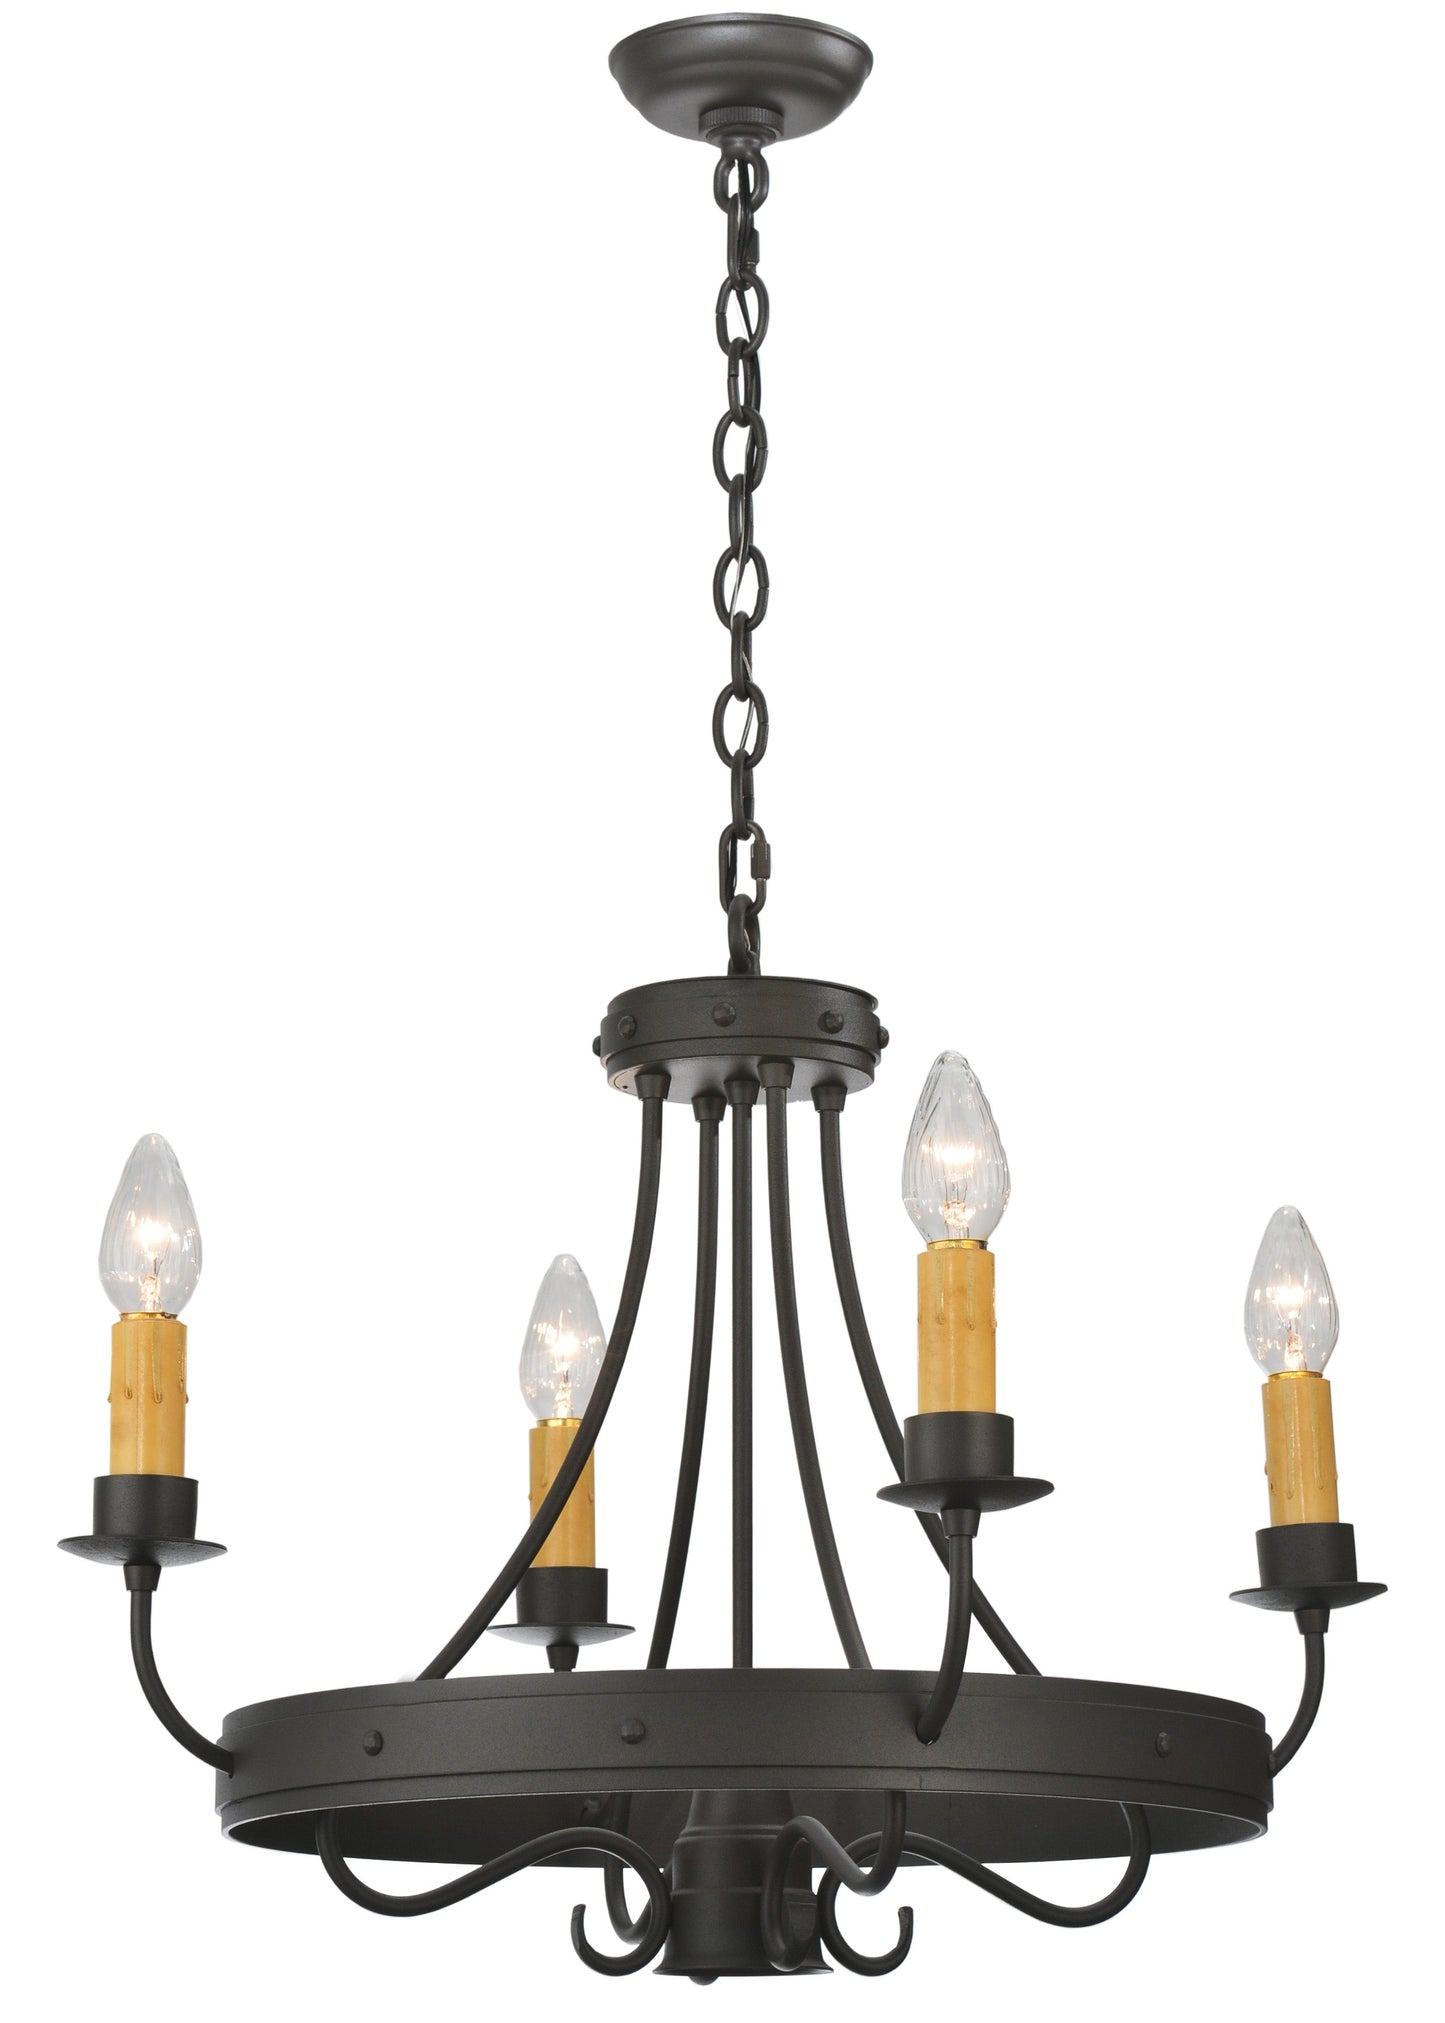 25" Franciscan 4-Light Chandelier by 2nd Ave Lighting